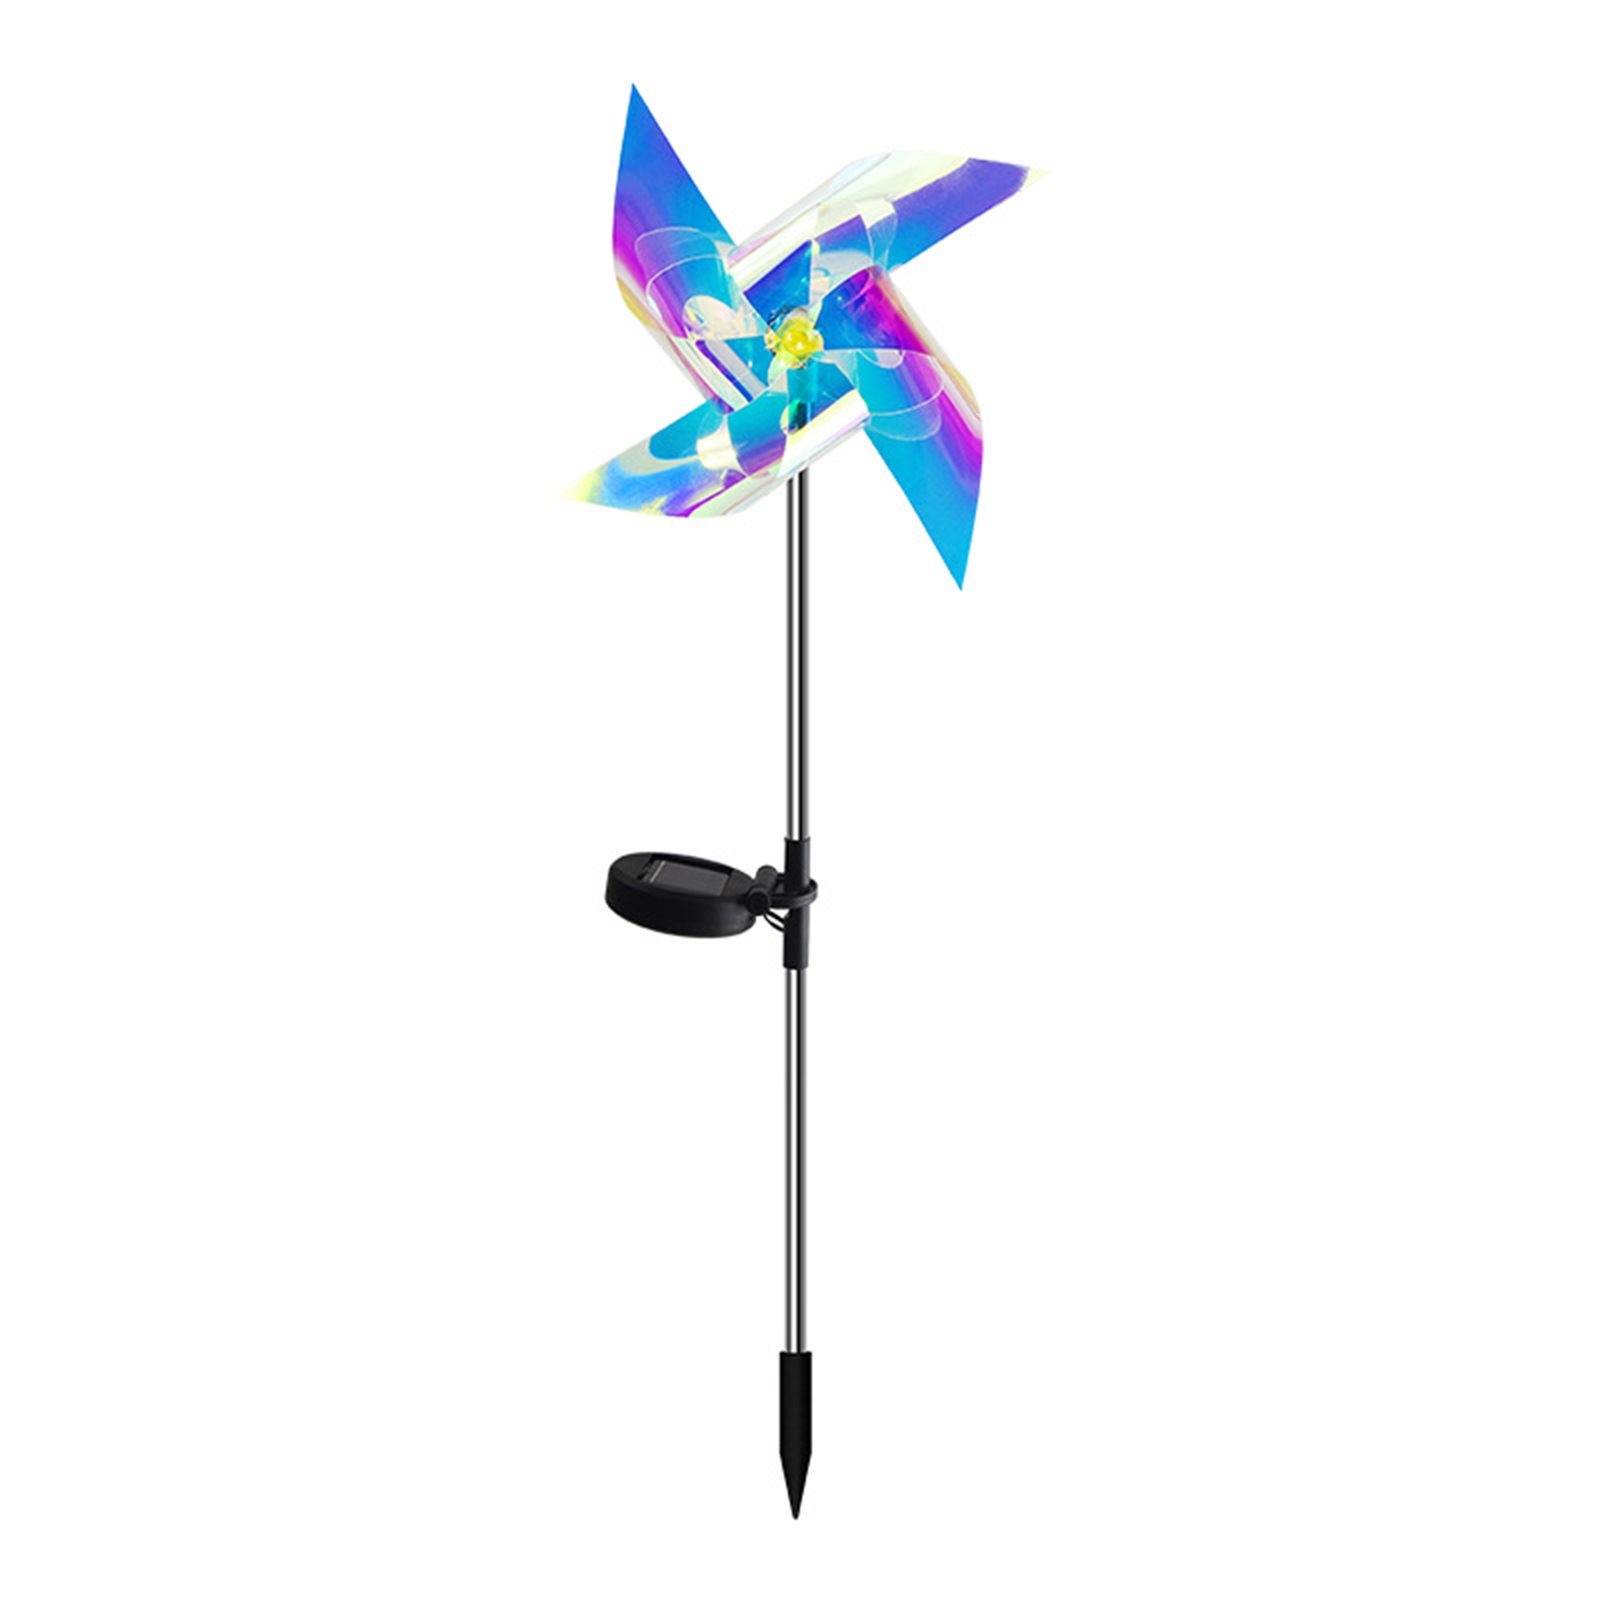 66CM Solar Windmill Lights With 2V120MA Solar Panel IP65 Waterproof Energy Saving Auto On/off Outdoor Courtyard Lawn Lamp